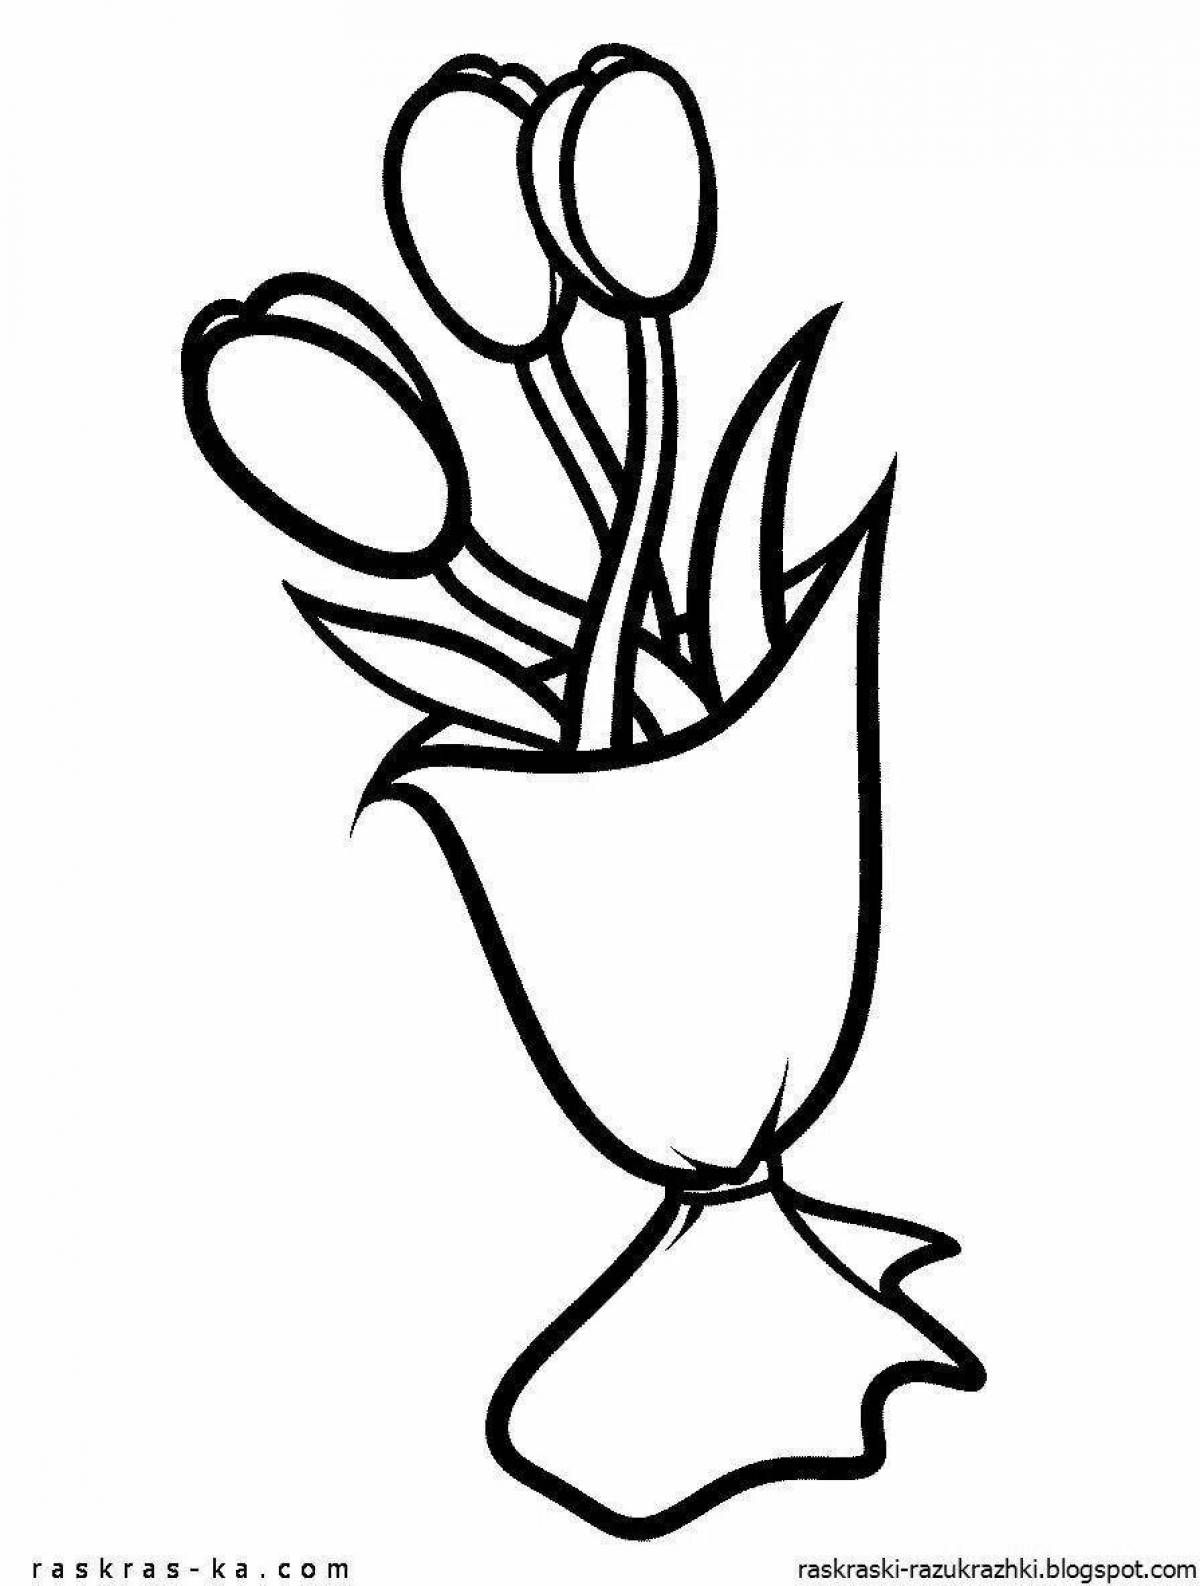 Coloring book tulips for March 8